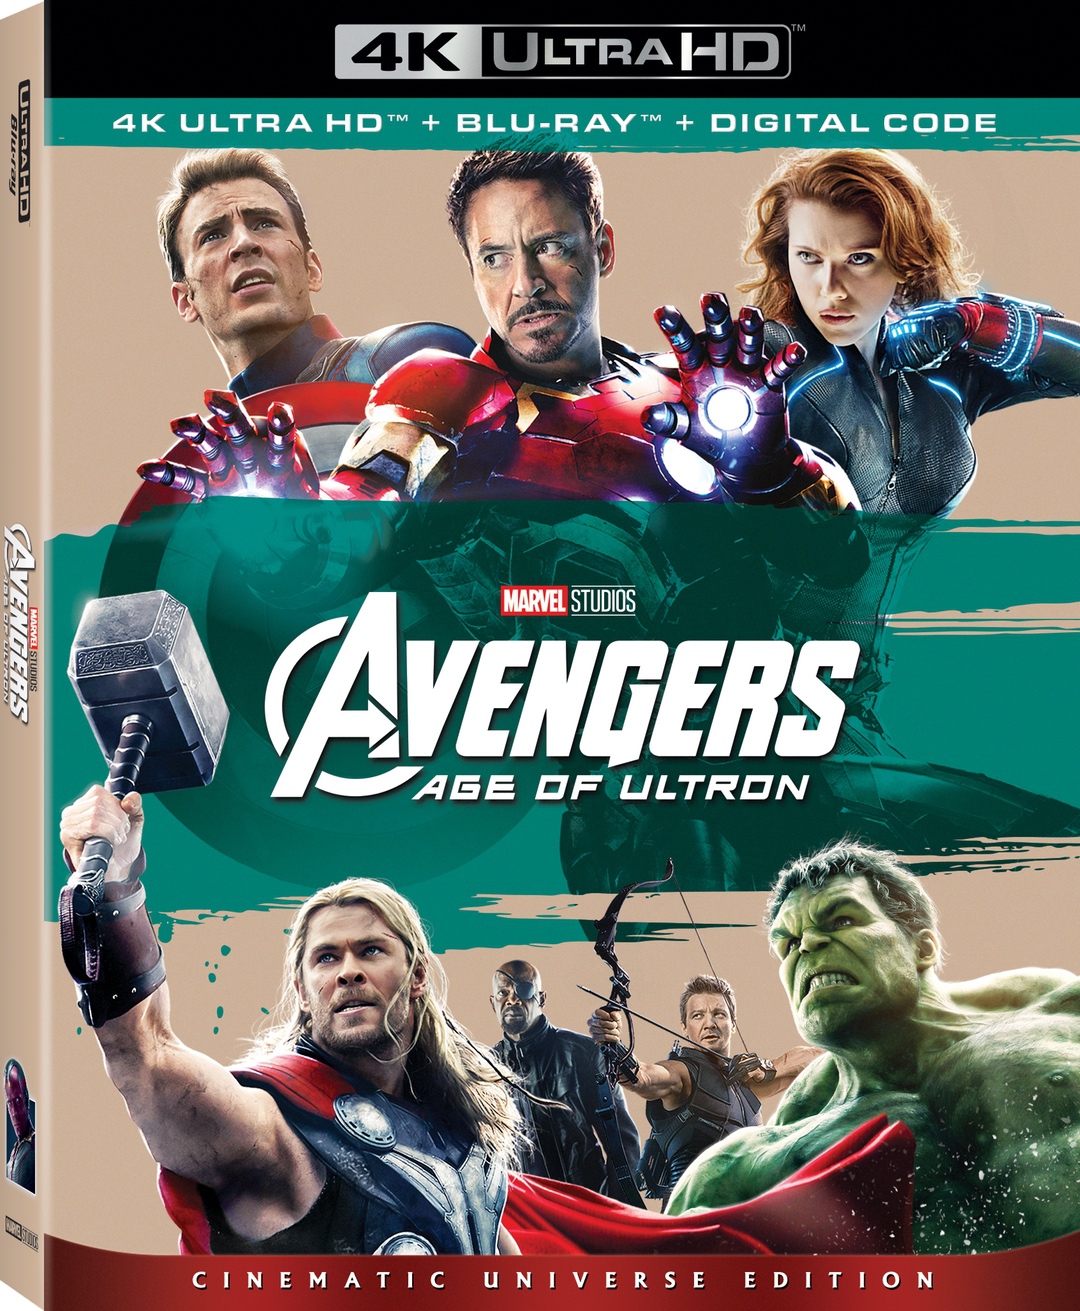 Avengers Age of Ultron #Avengers #movies #marvel #ad